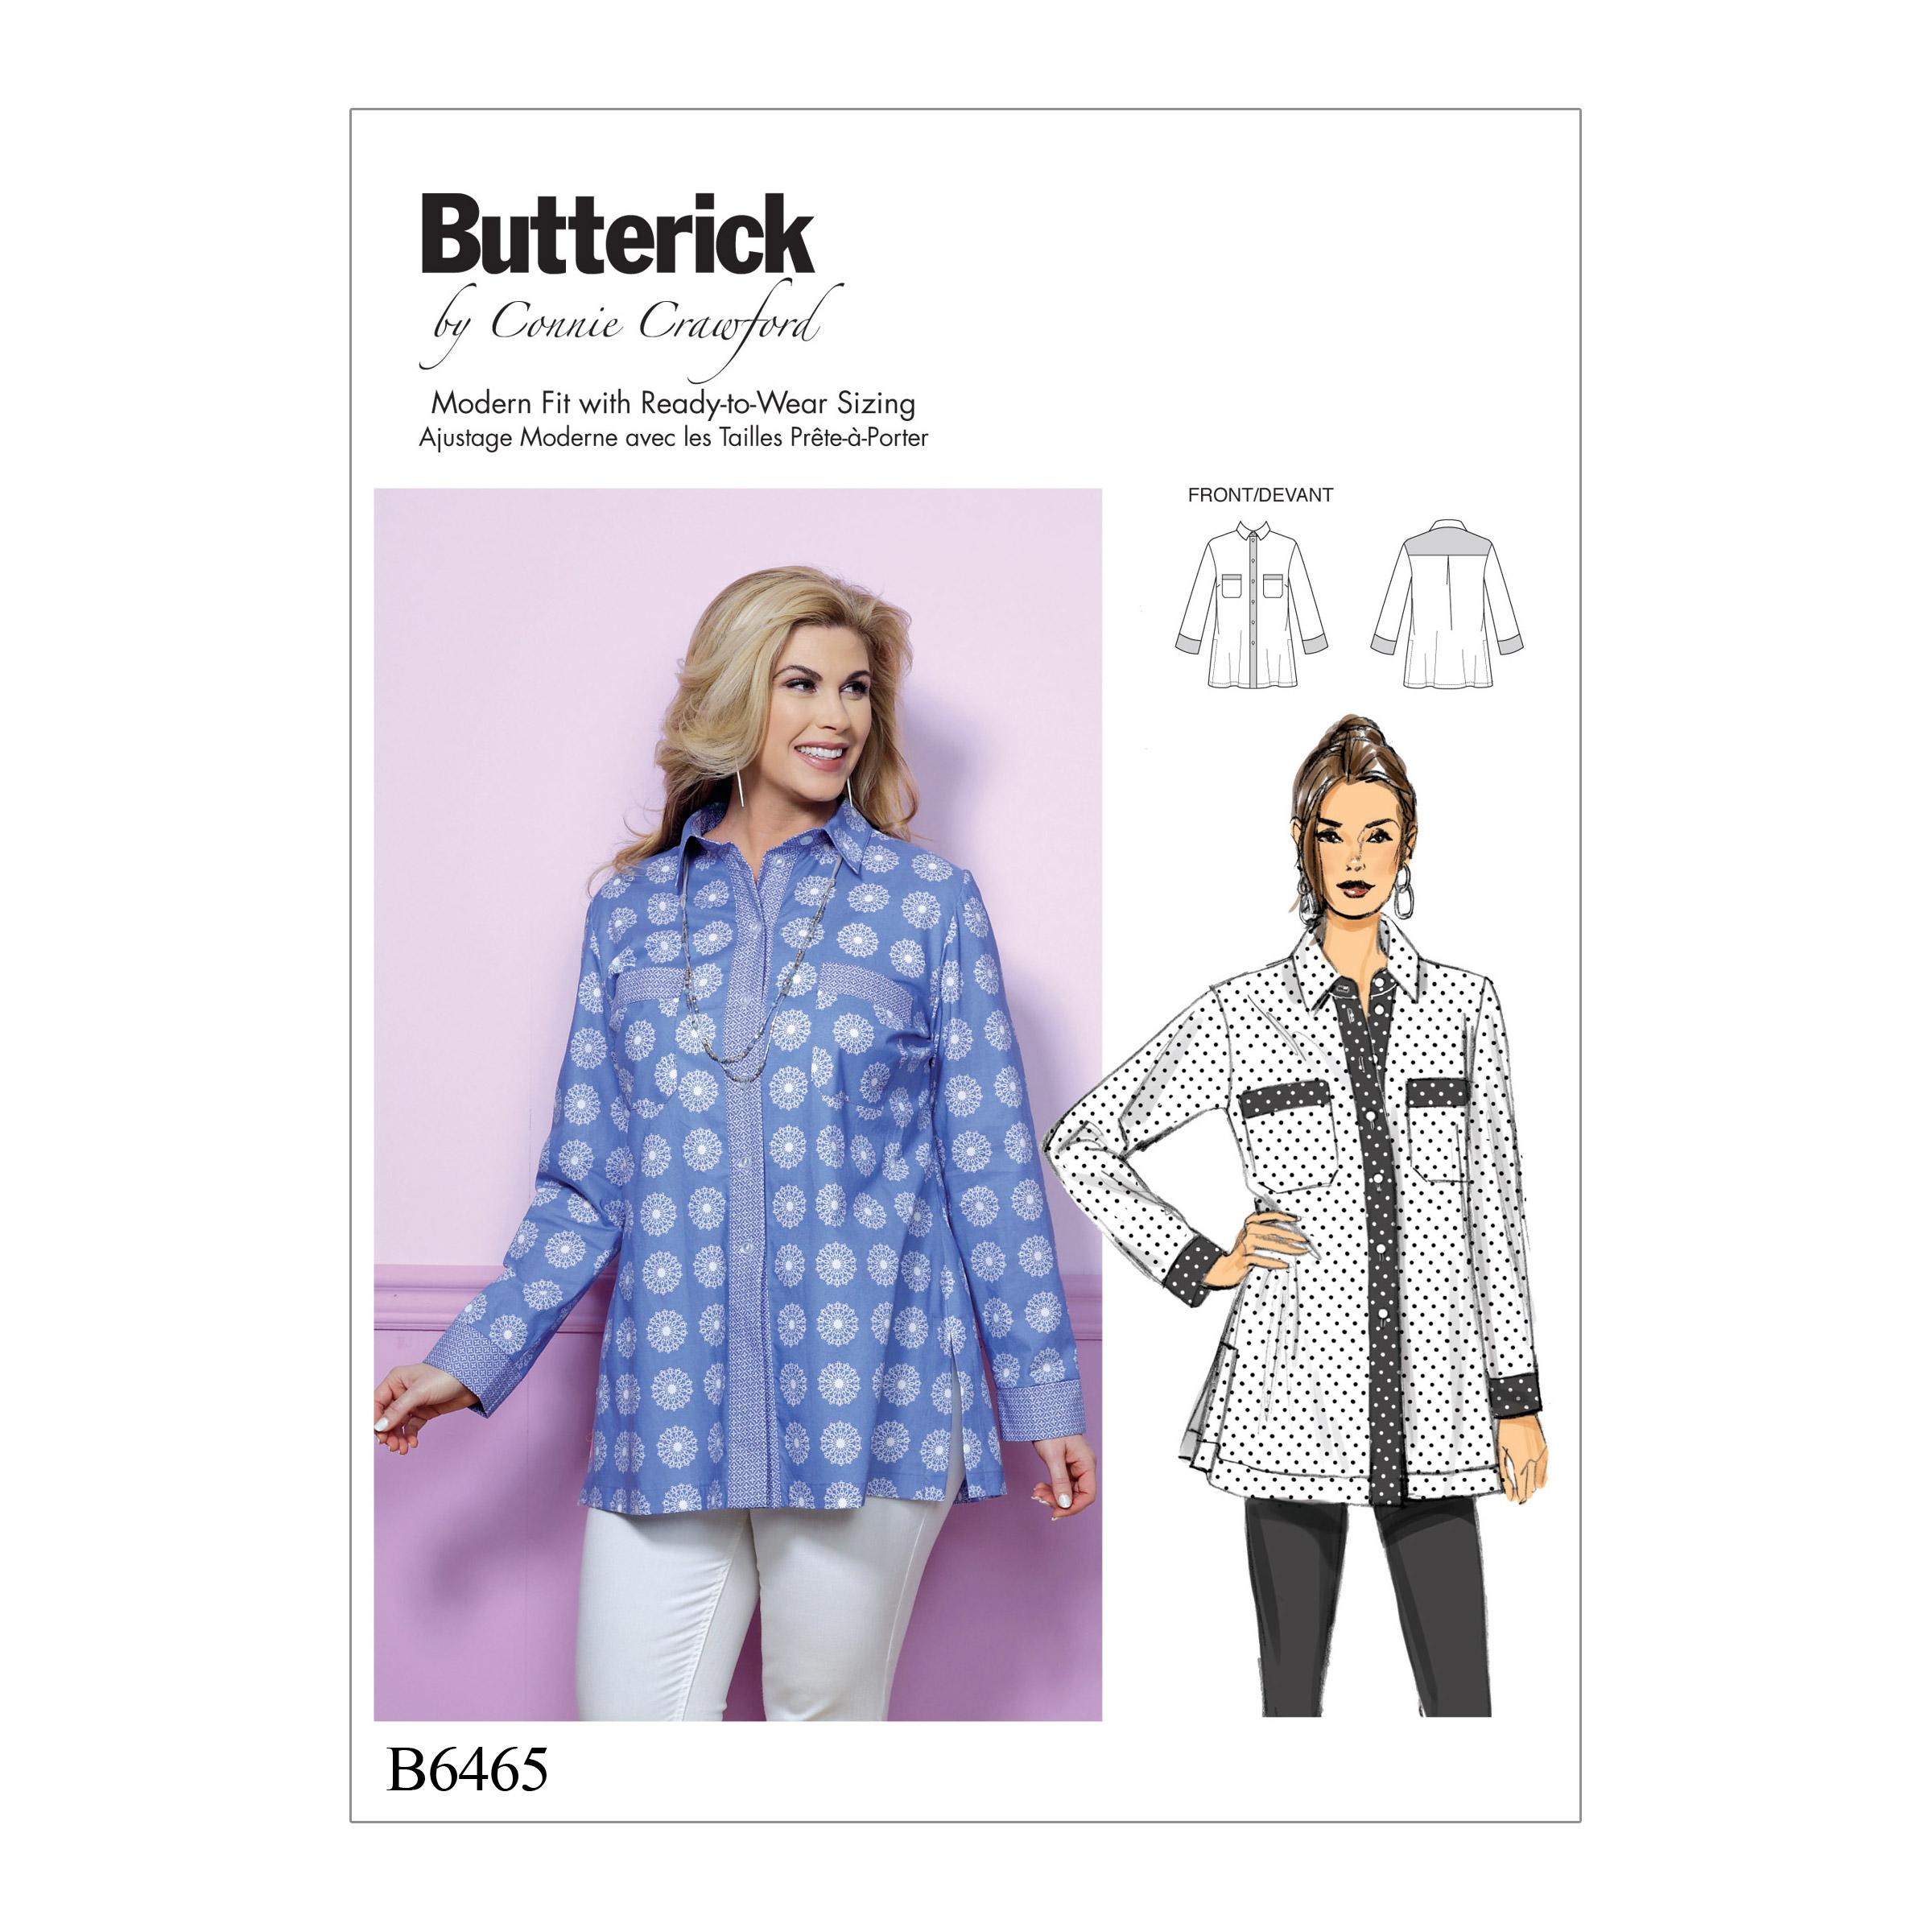 Butterick B6465 Misses'/Women's Button-Down Shirt with Side Slits and Bust Pockets